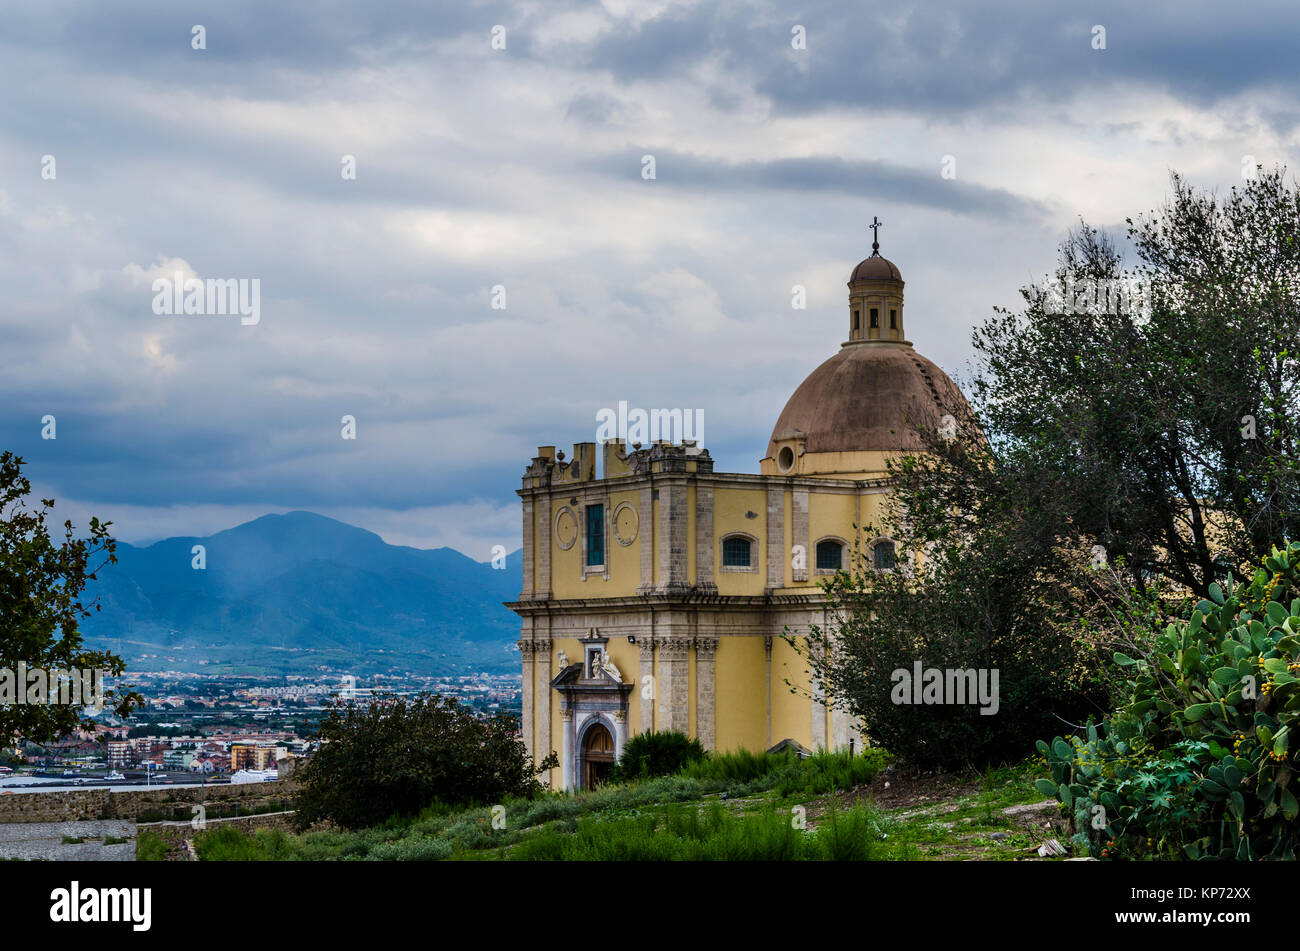 Baroque church the city of milazzo in the environs of its port and the landscape of the Sicilian territory with its mountains Stock Photo